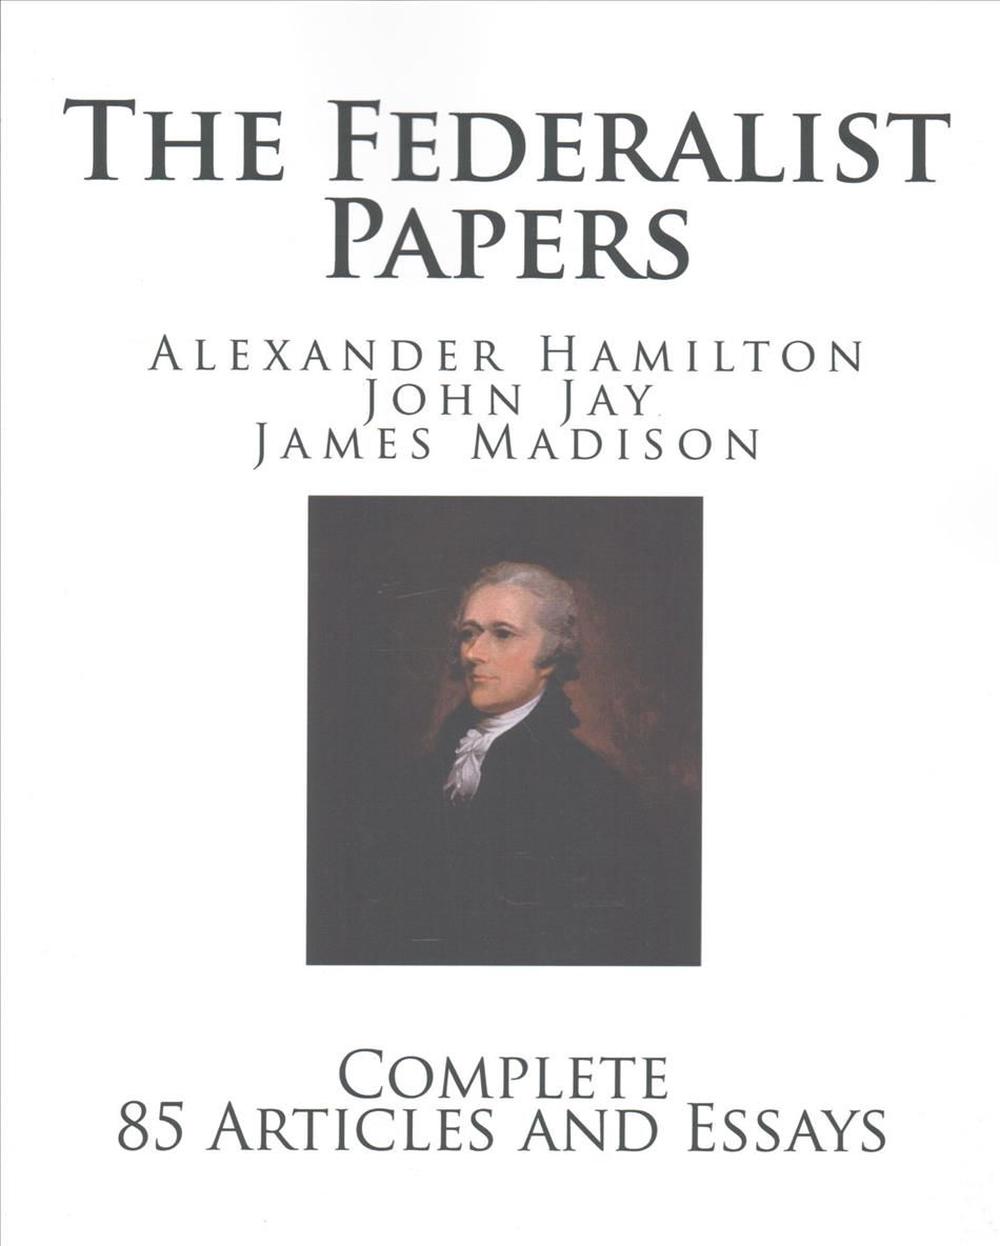 federalist papers how many did hamilton write